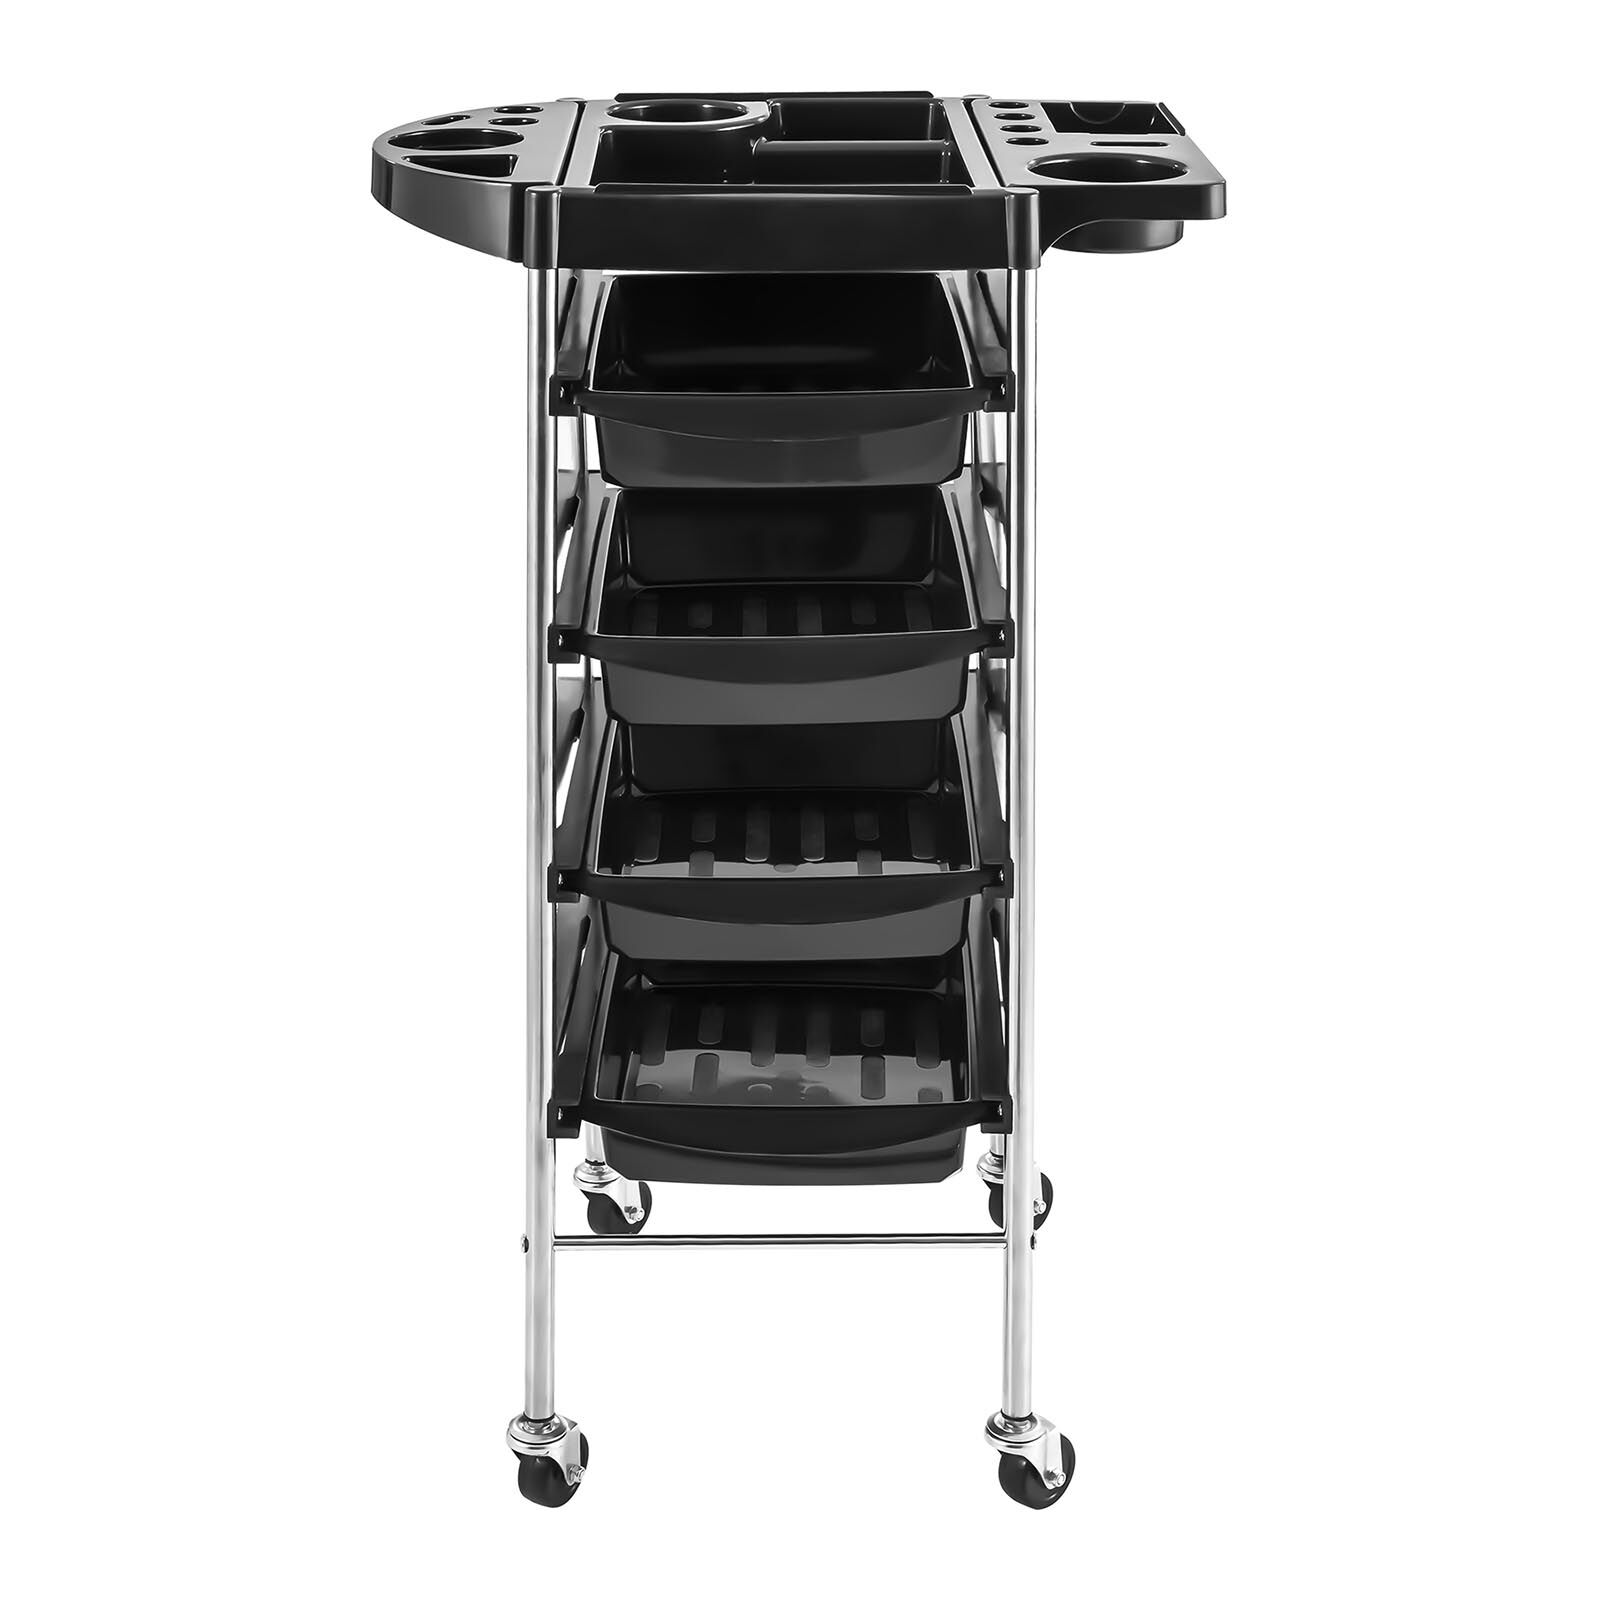 physa Roller shelf RR-7 from Physa Physa-RR-4S